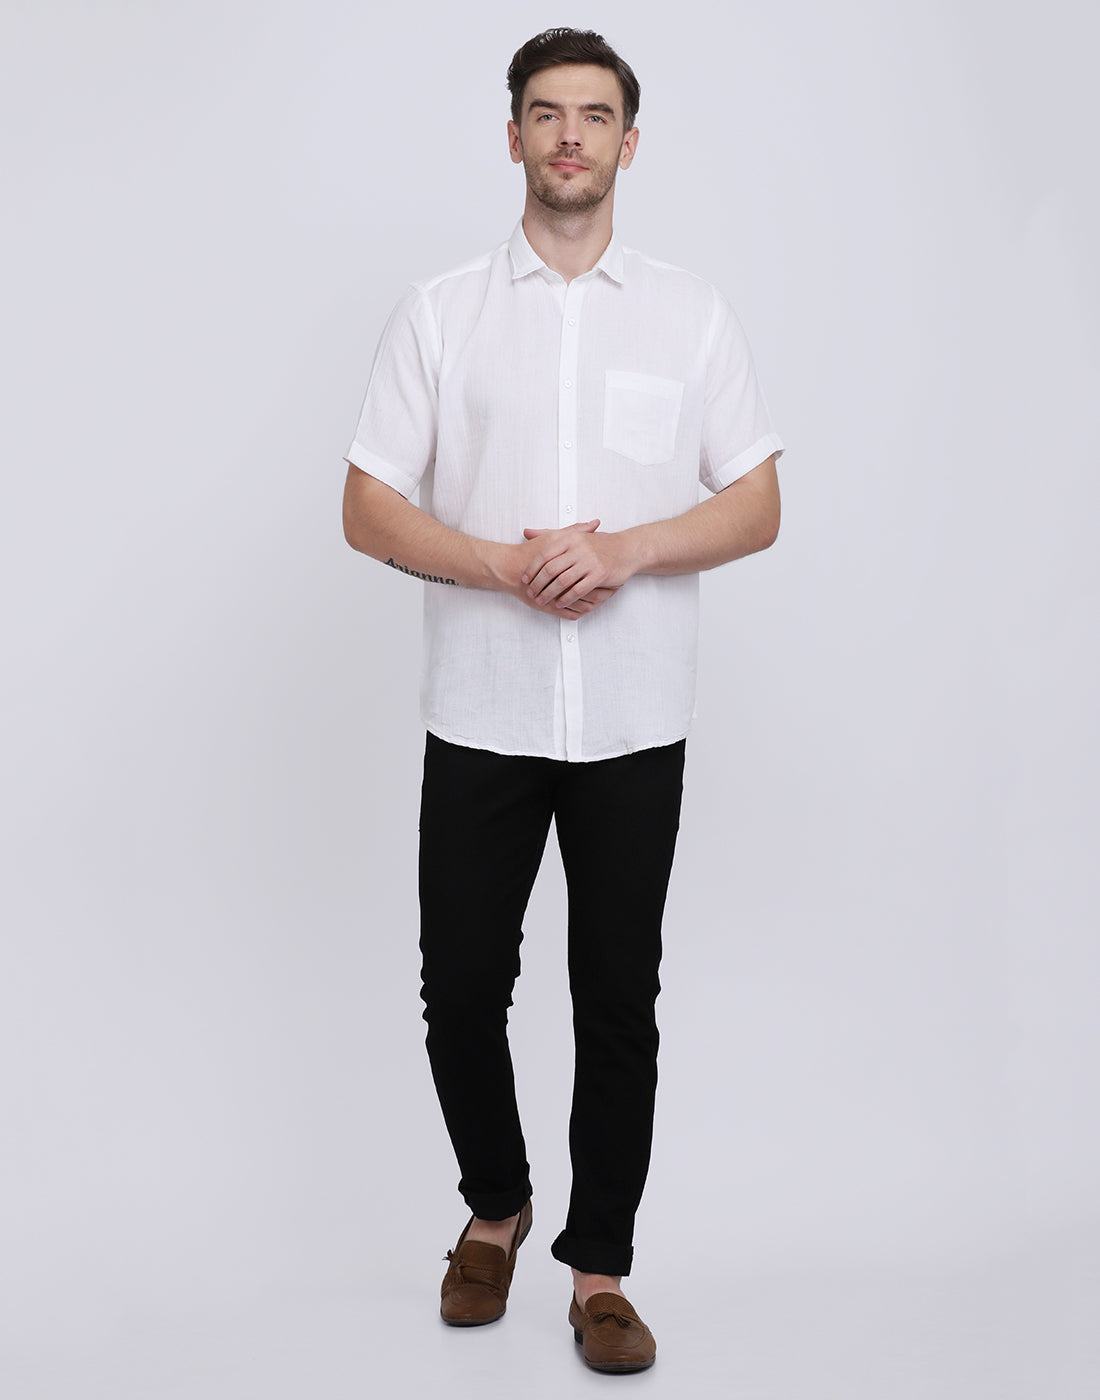 Double Cloth Crinkled Cotton men's Half Sleeves shirt